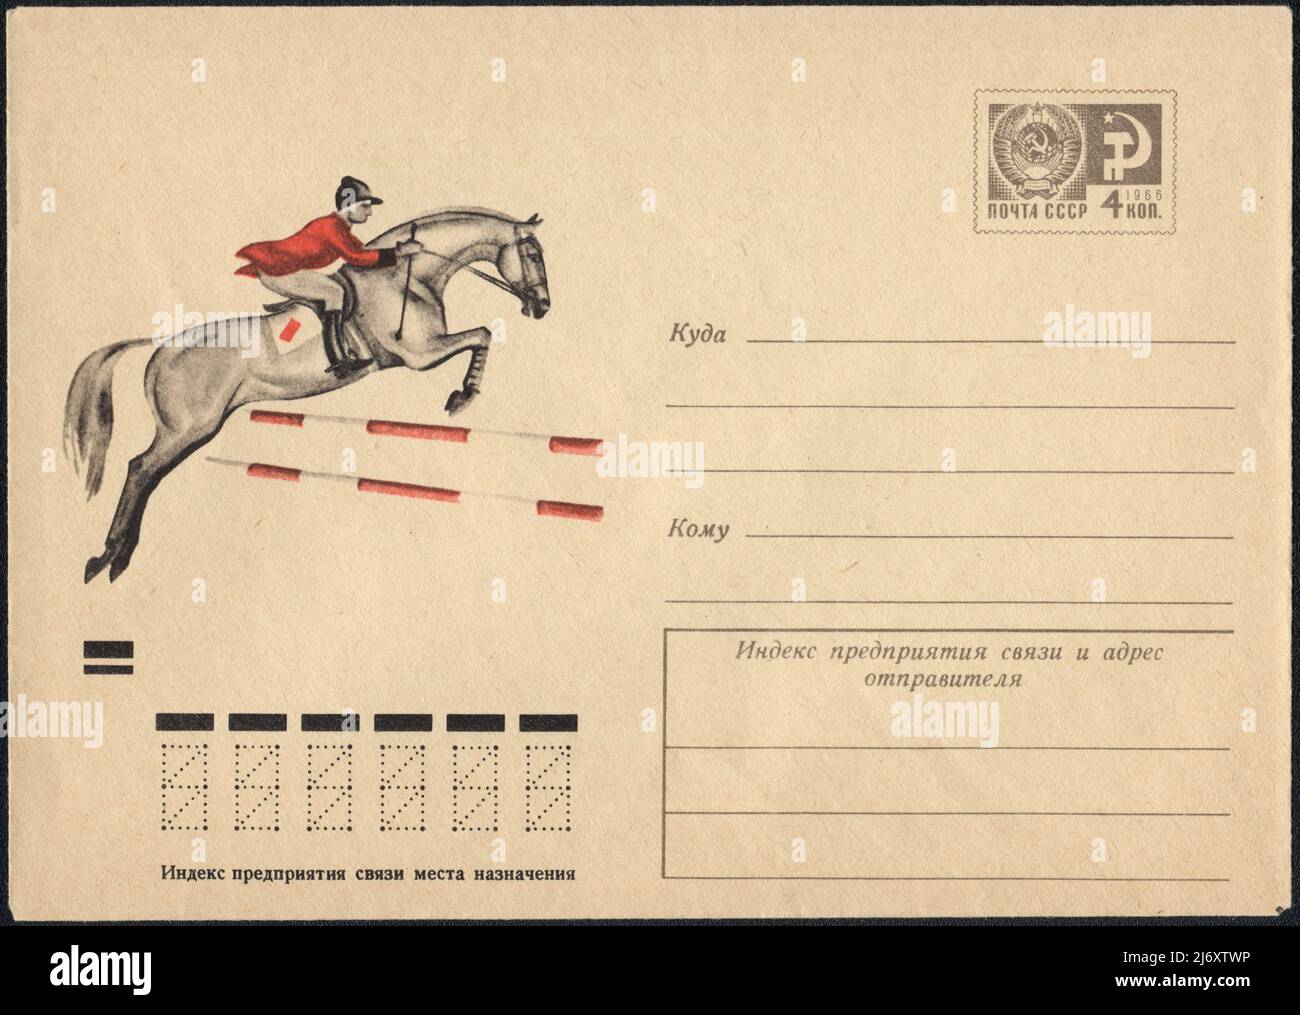 Old soviet envelope with image Equestrian sport, USSR 1972 Stock Photo